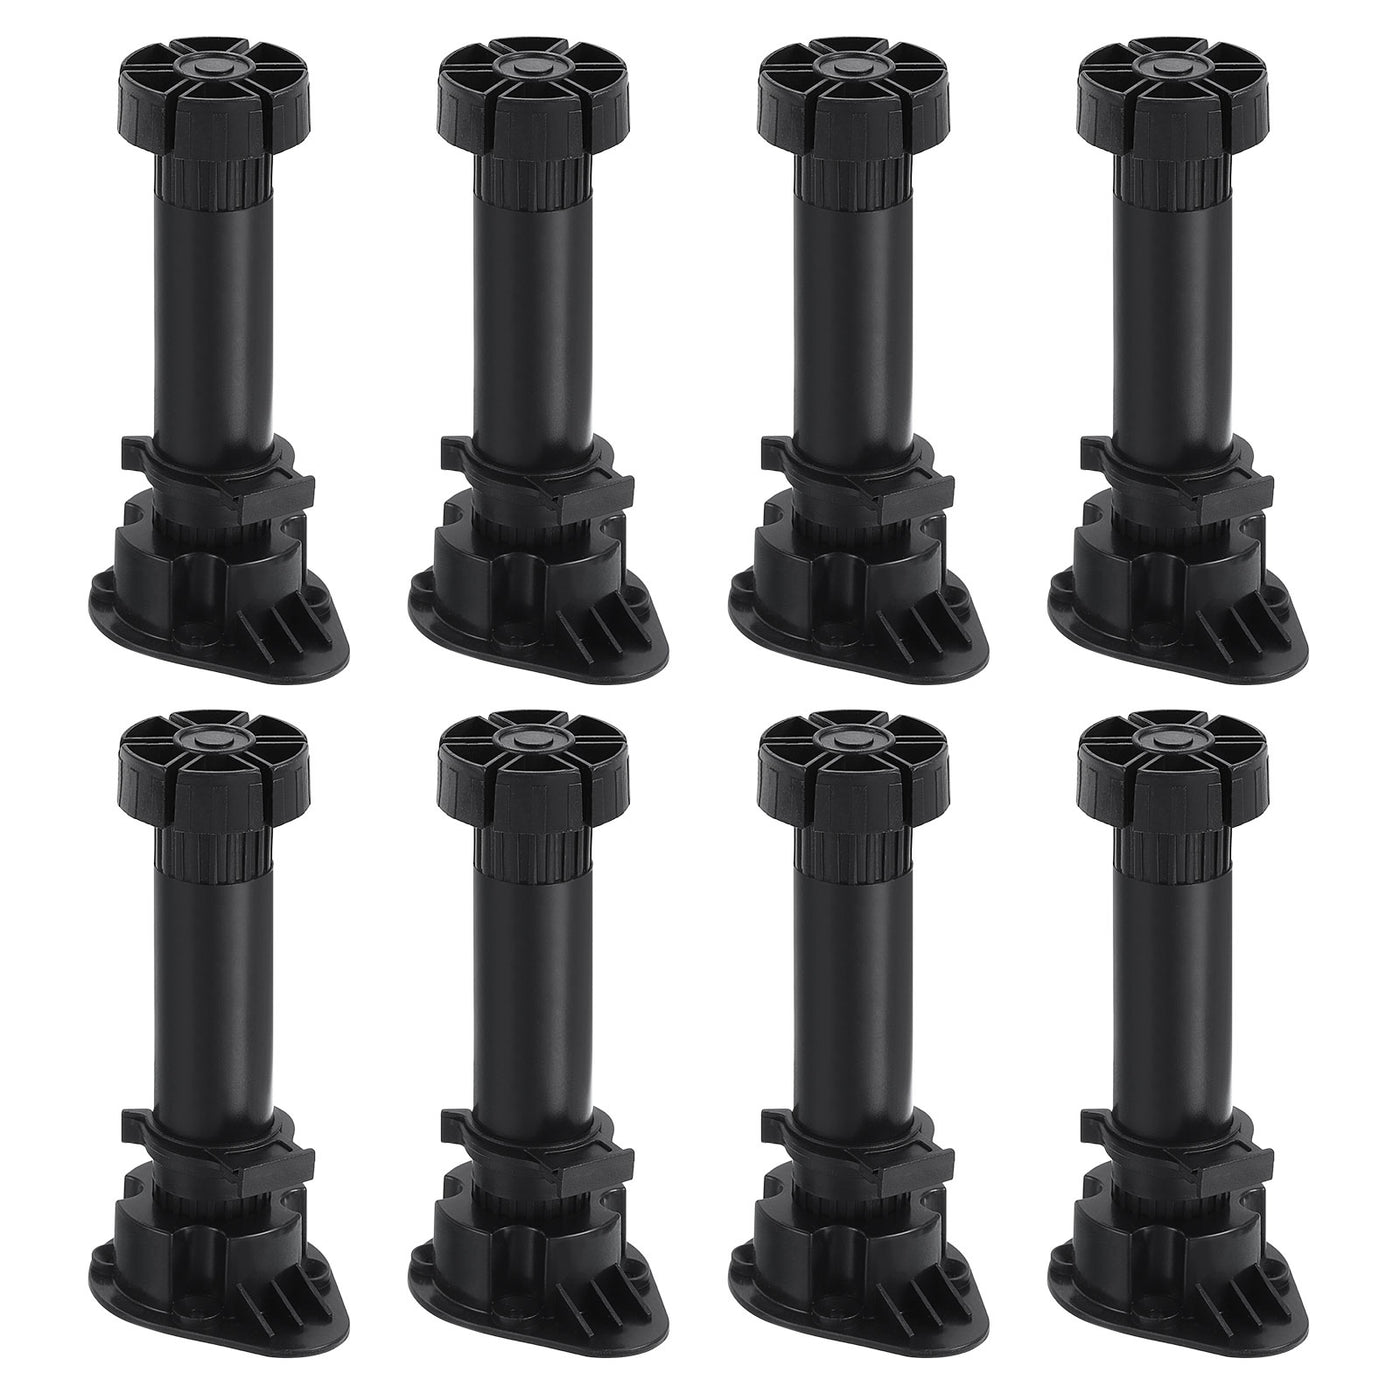 uxcell Uxcell Adjustable Legs, 8Pcs 44 x 150mm - Furniture Leveling Foot, Thick Thin Legs Leveler Support Frame for Bed Sofa Coffee Table Bathroom Cabinet (Black)